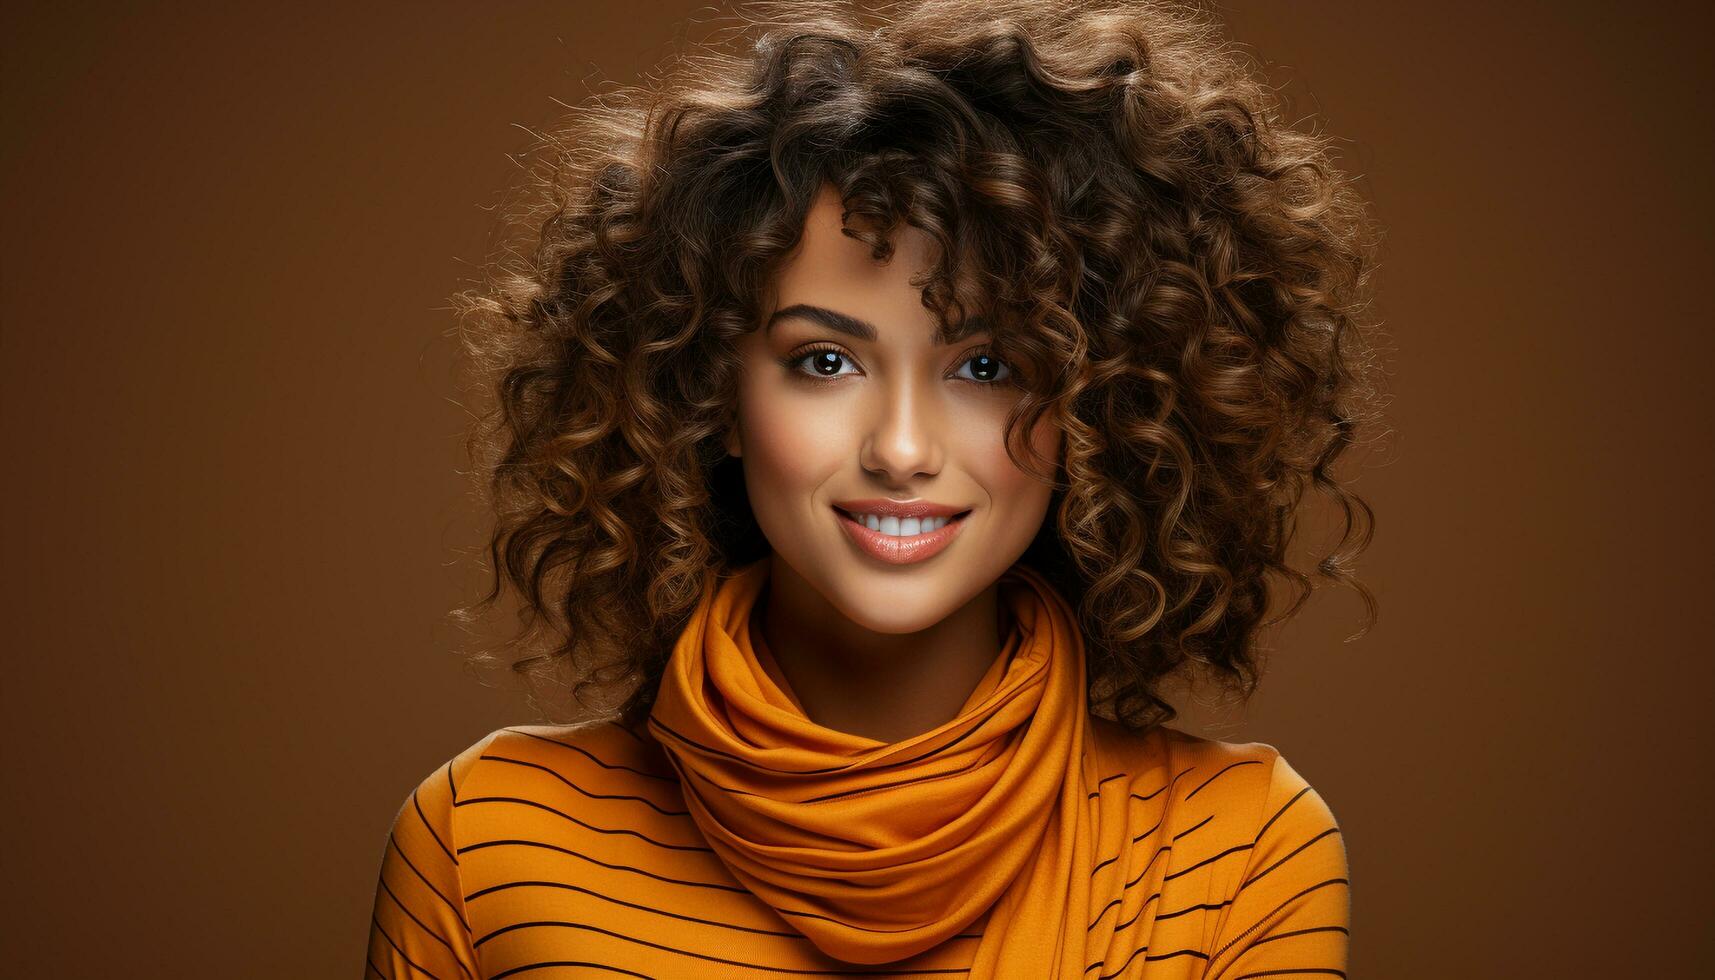 One beautiful woman with curly hair smiling at camera generated by AI photo